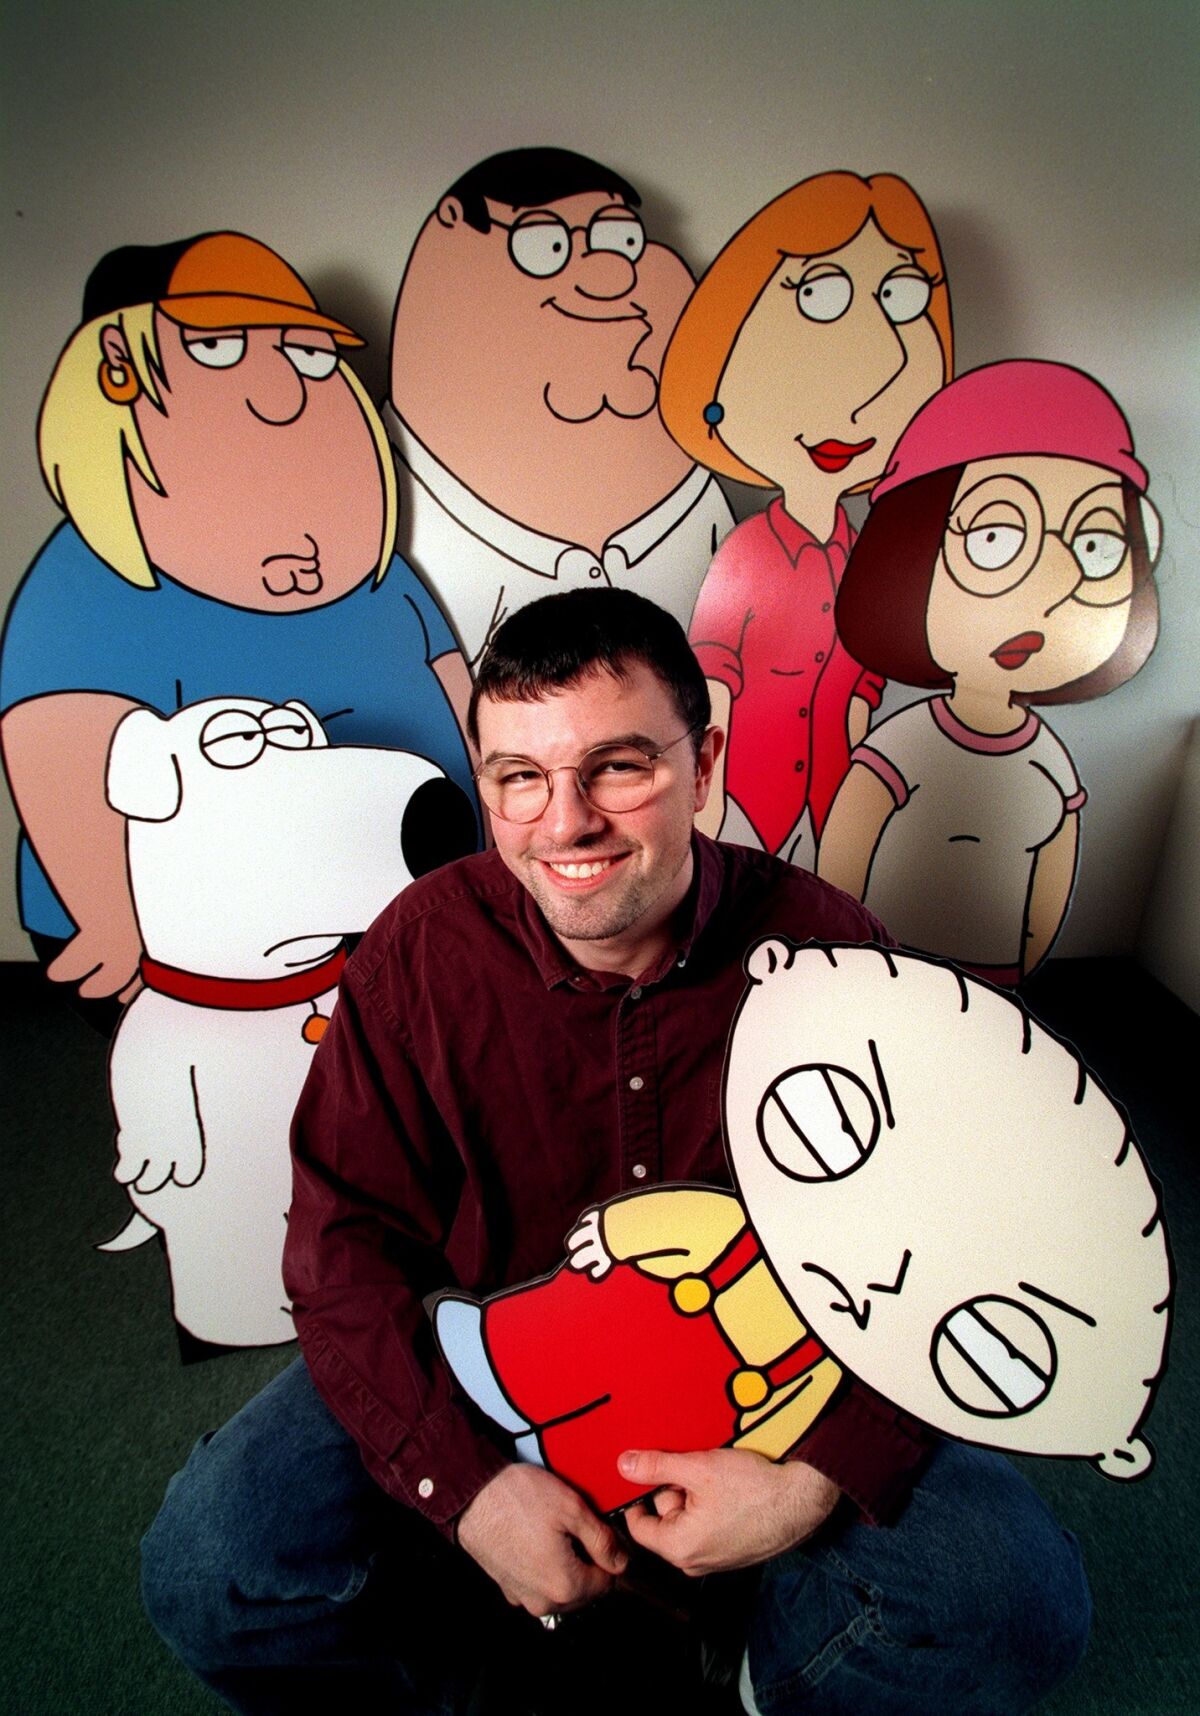 Seth MacFarlane with his "Family Guy" characters in 1998.